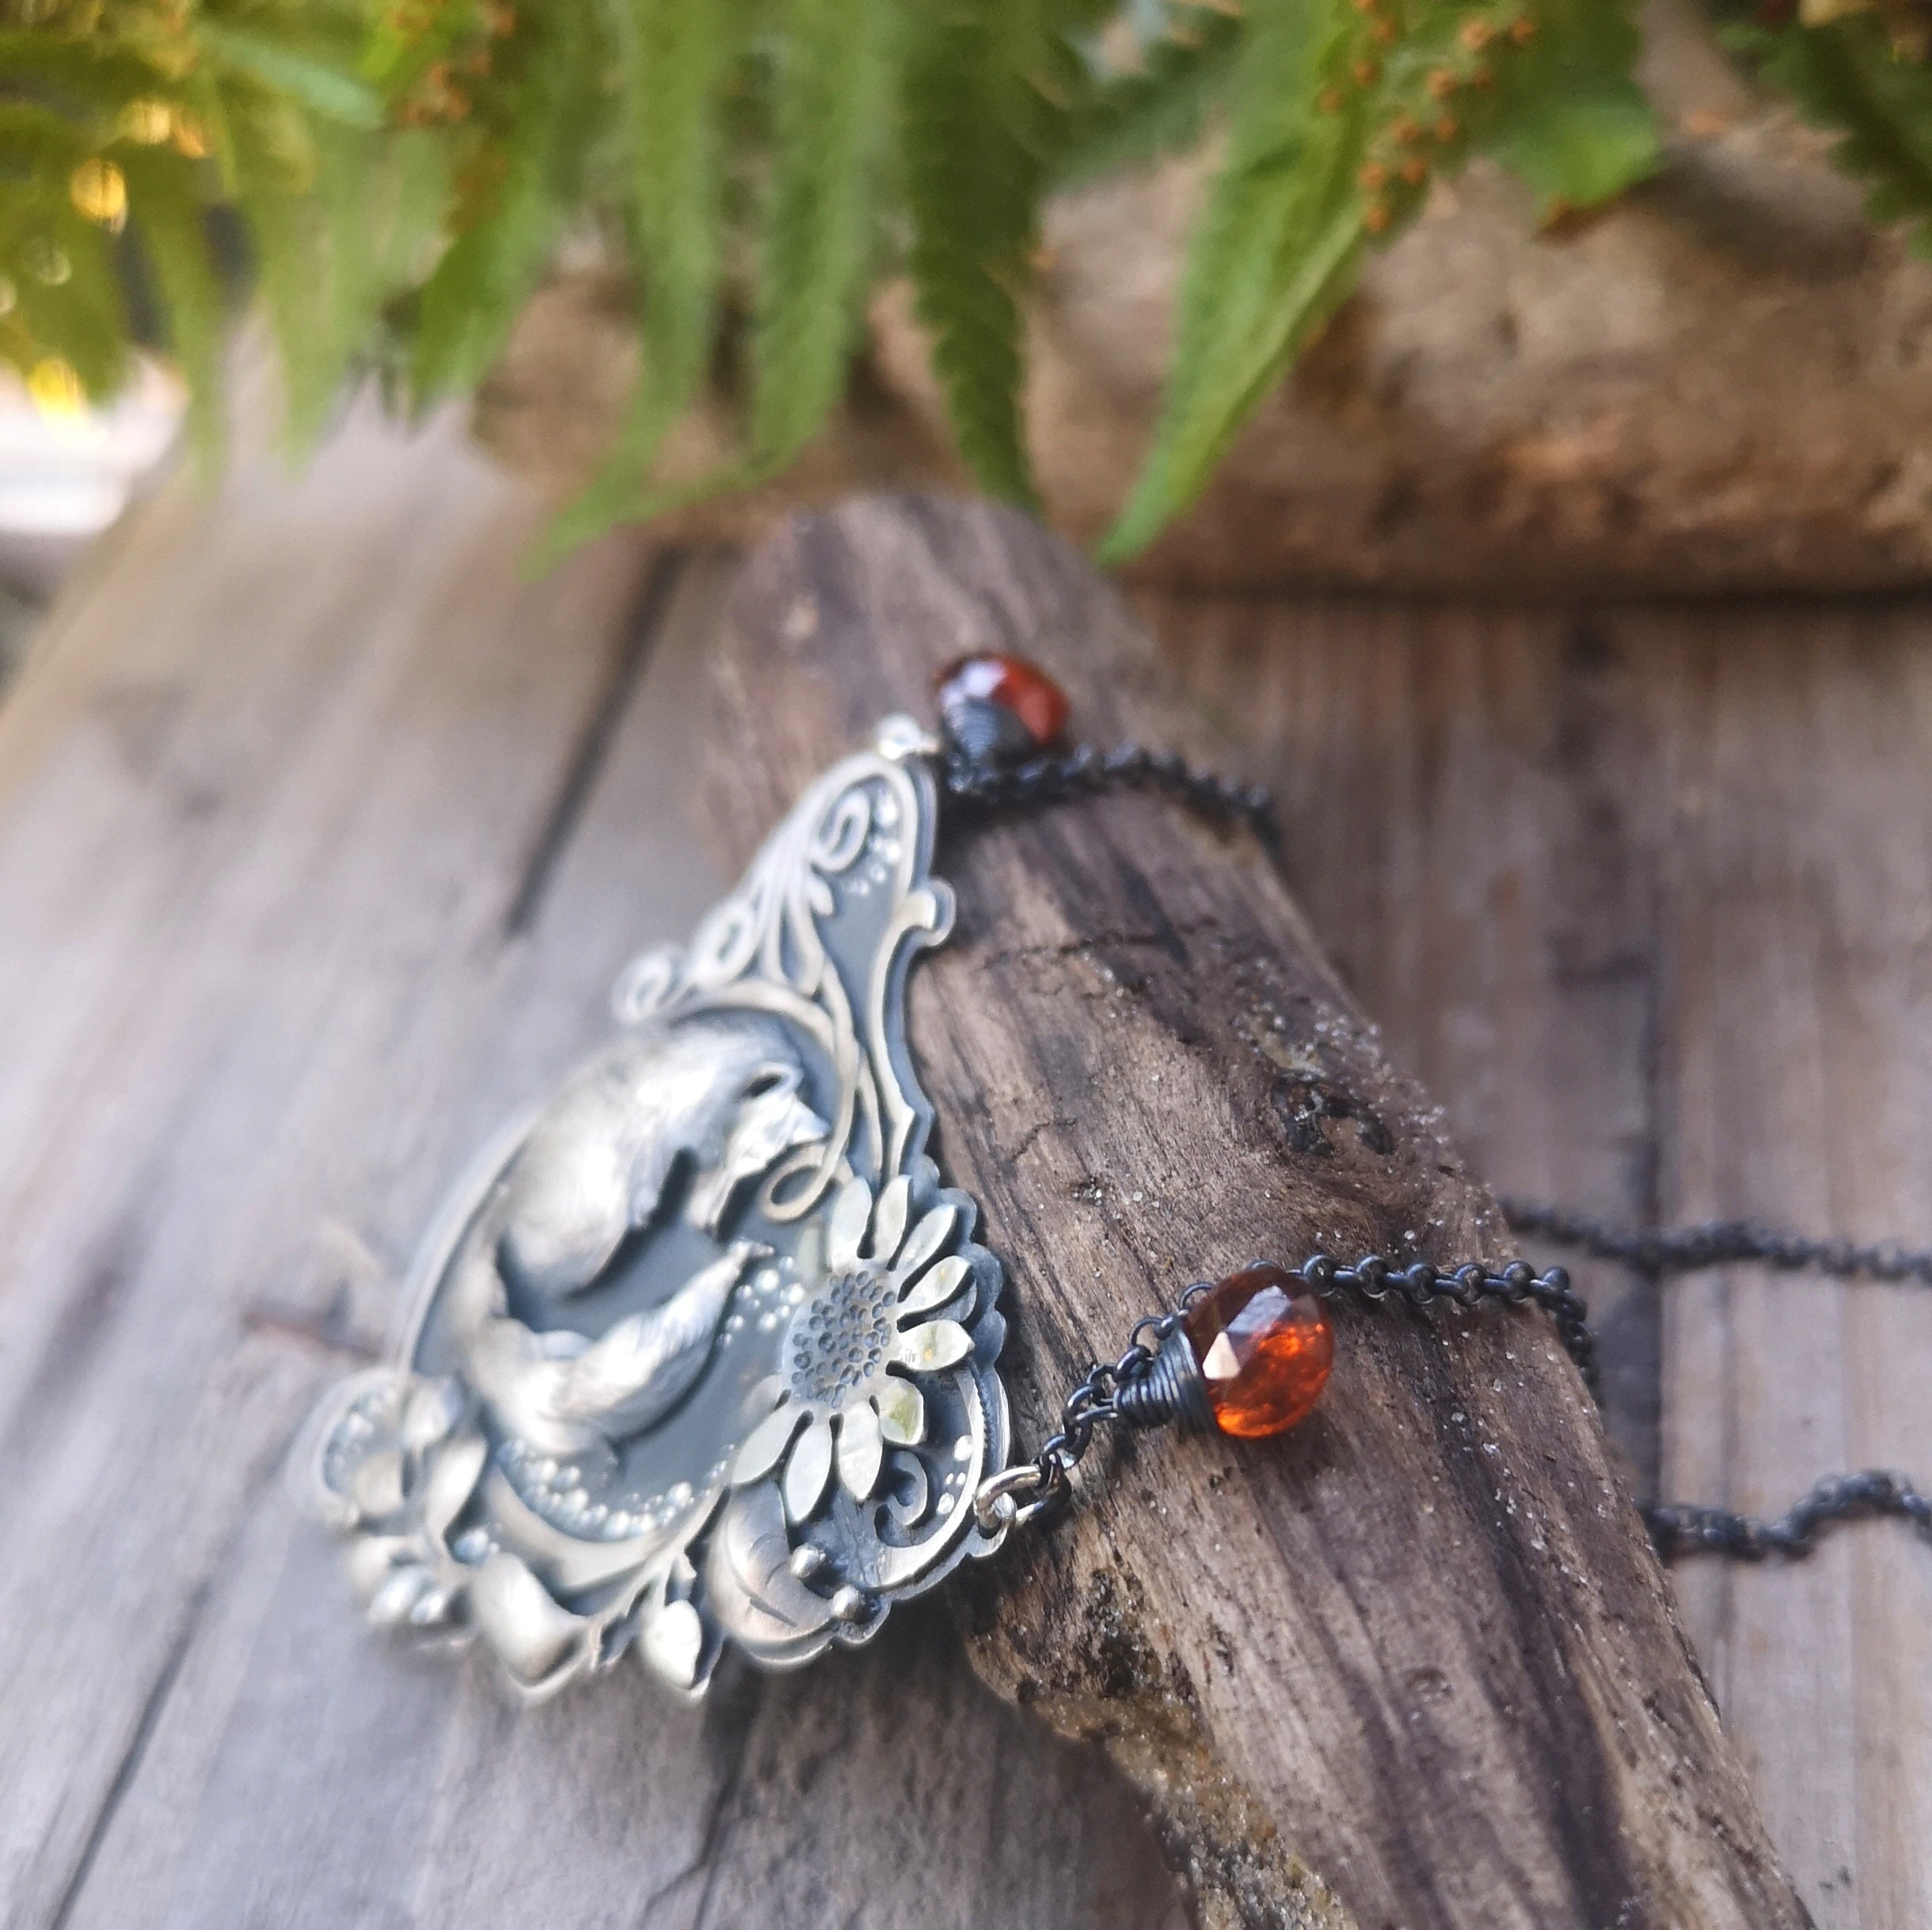 The Fox Necklace - Art Nouveau Inspired Necklace